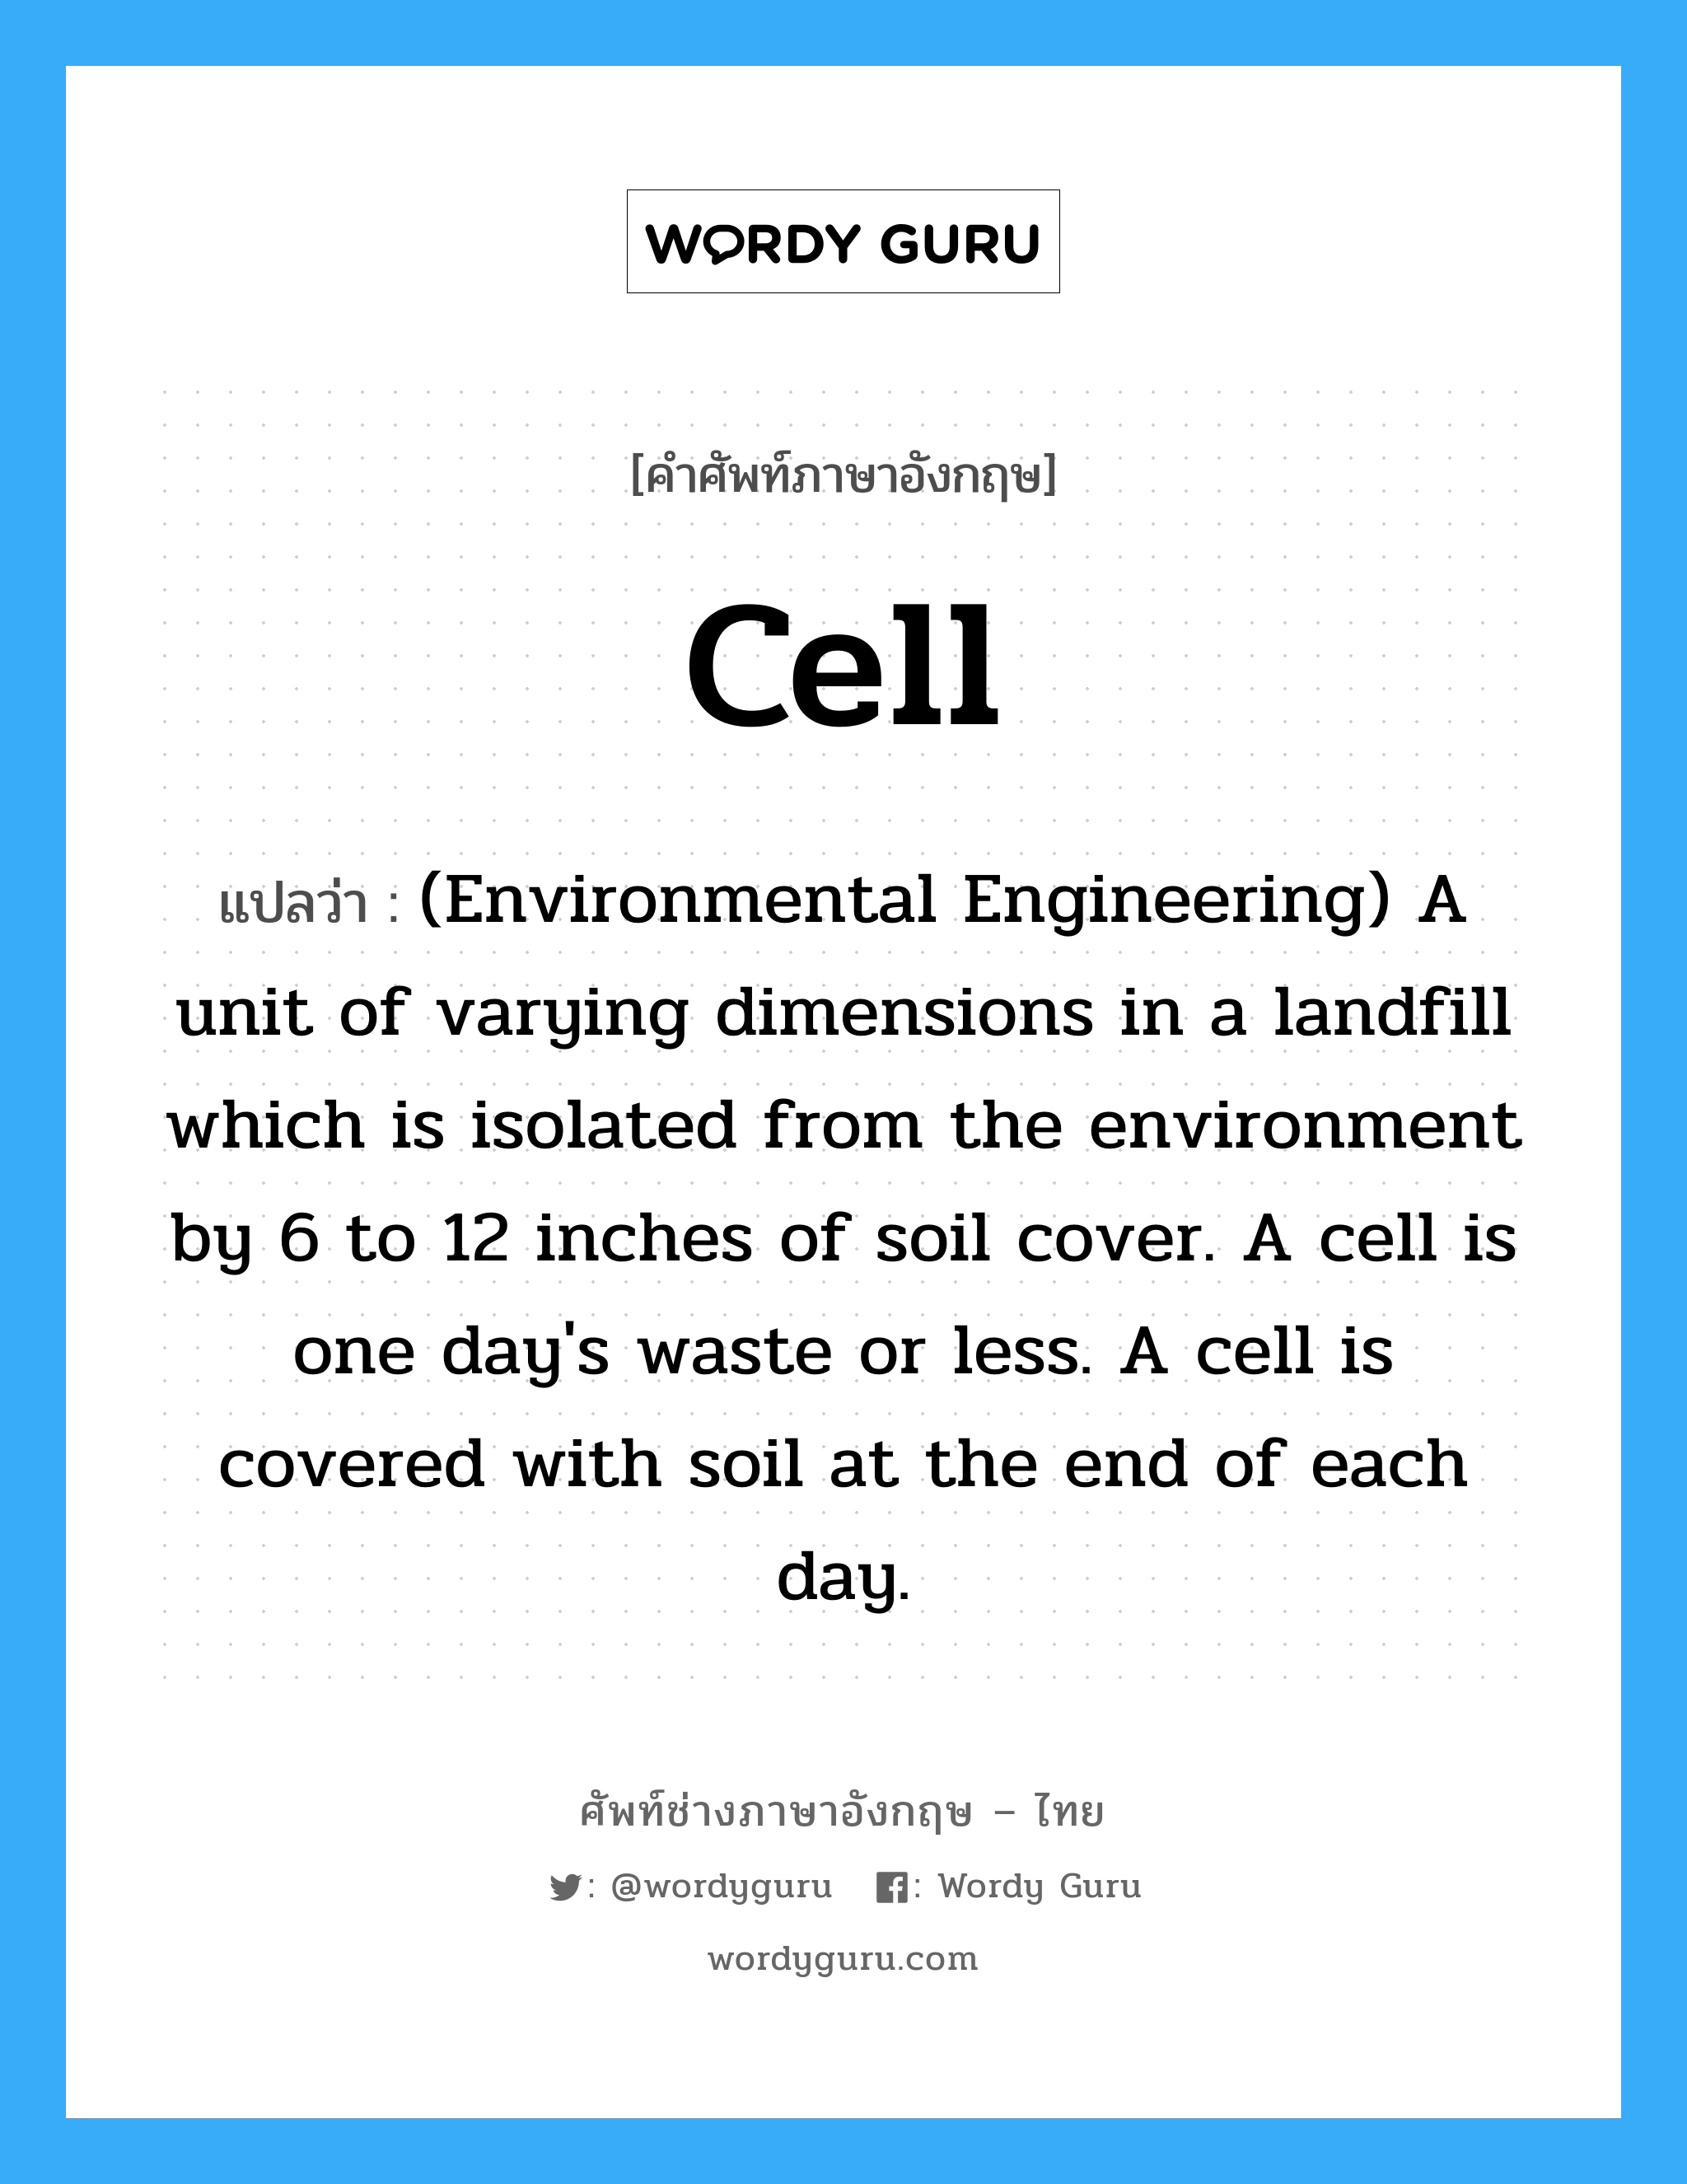 Cell แปลว่า?, คำศัพท์ช่างภาษาอังกฤษ - ไทย Cell คำศัพท์ภาษาอังกฤษ Cell แปลว่า (Environmental Engineering) A unit of varying dimensions in a landfill which is isolated from the environment by 6 to 12 inches of soil cover. A cell is one day's waste or less. A cell is covered with soil at the end of each day.